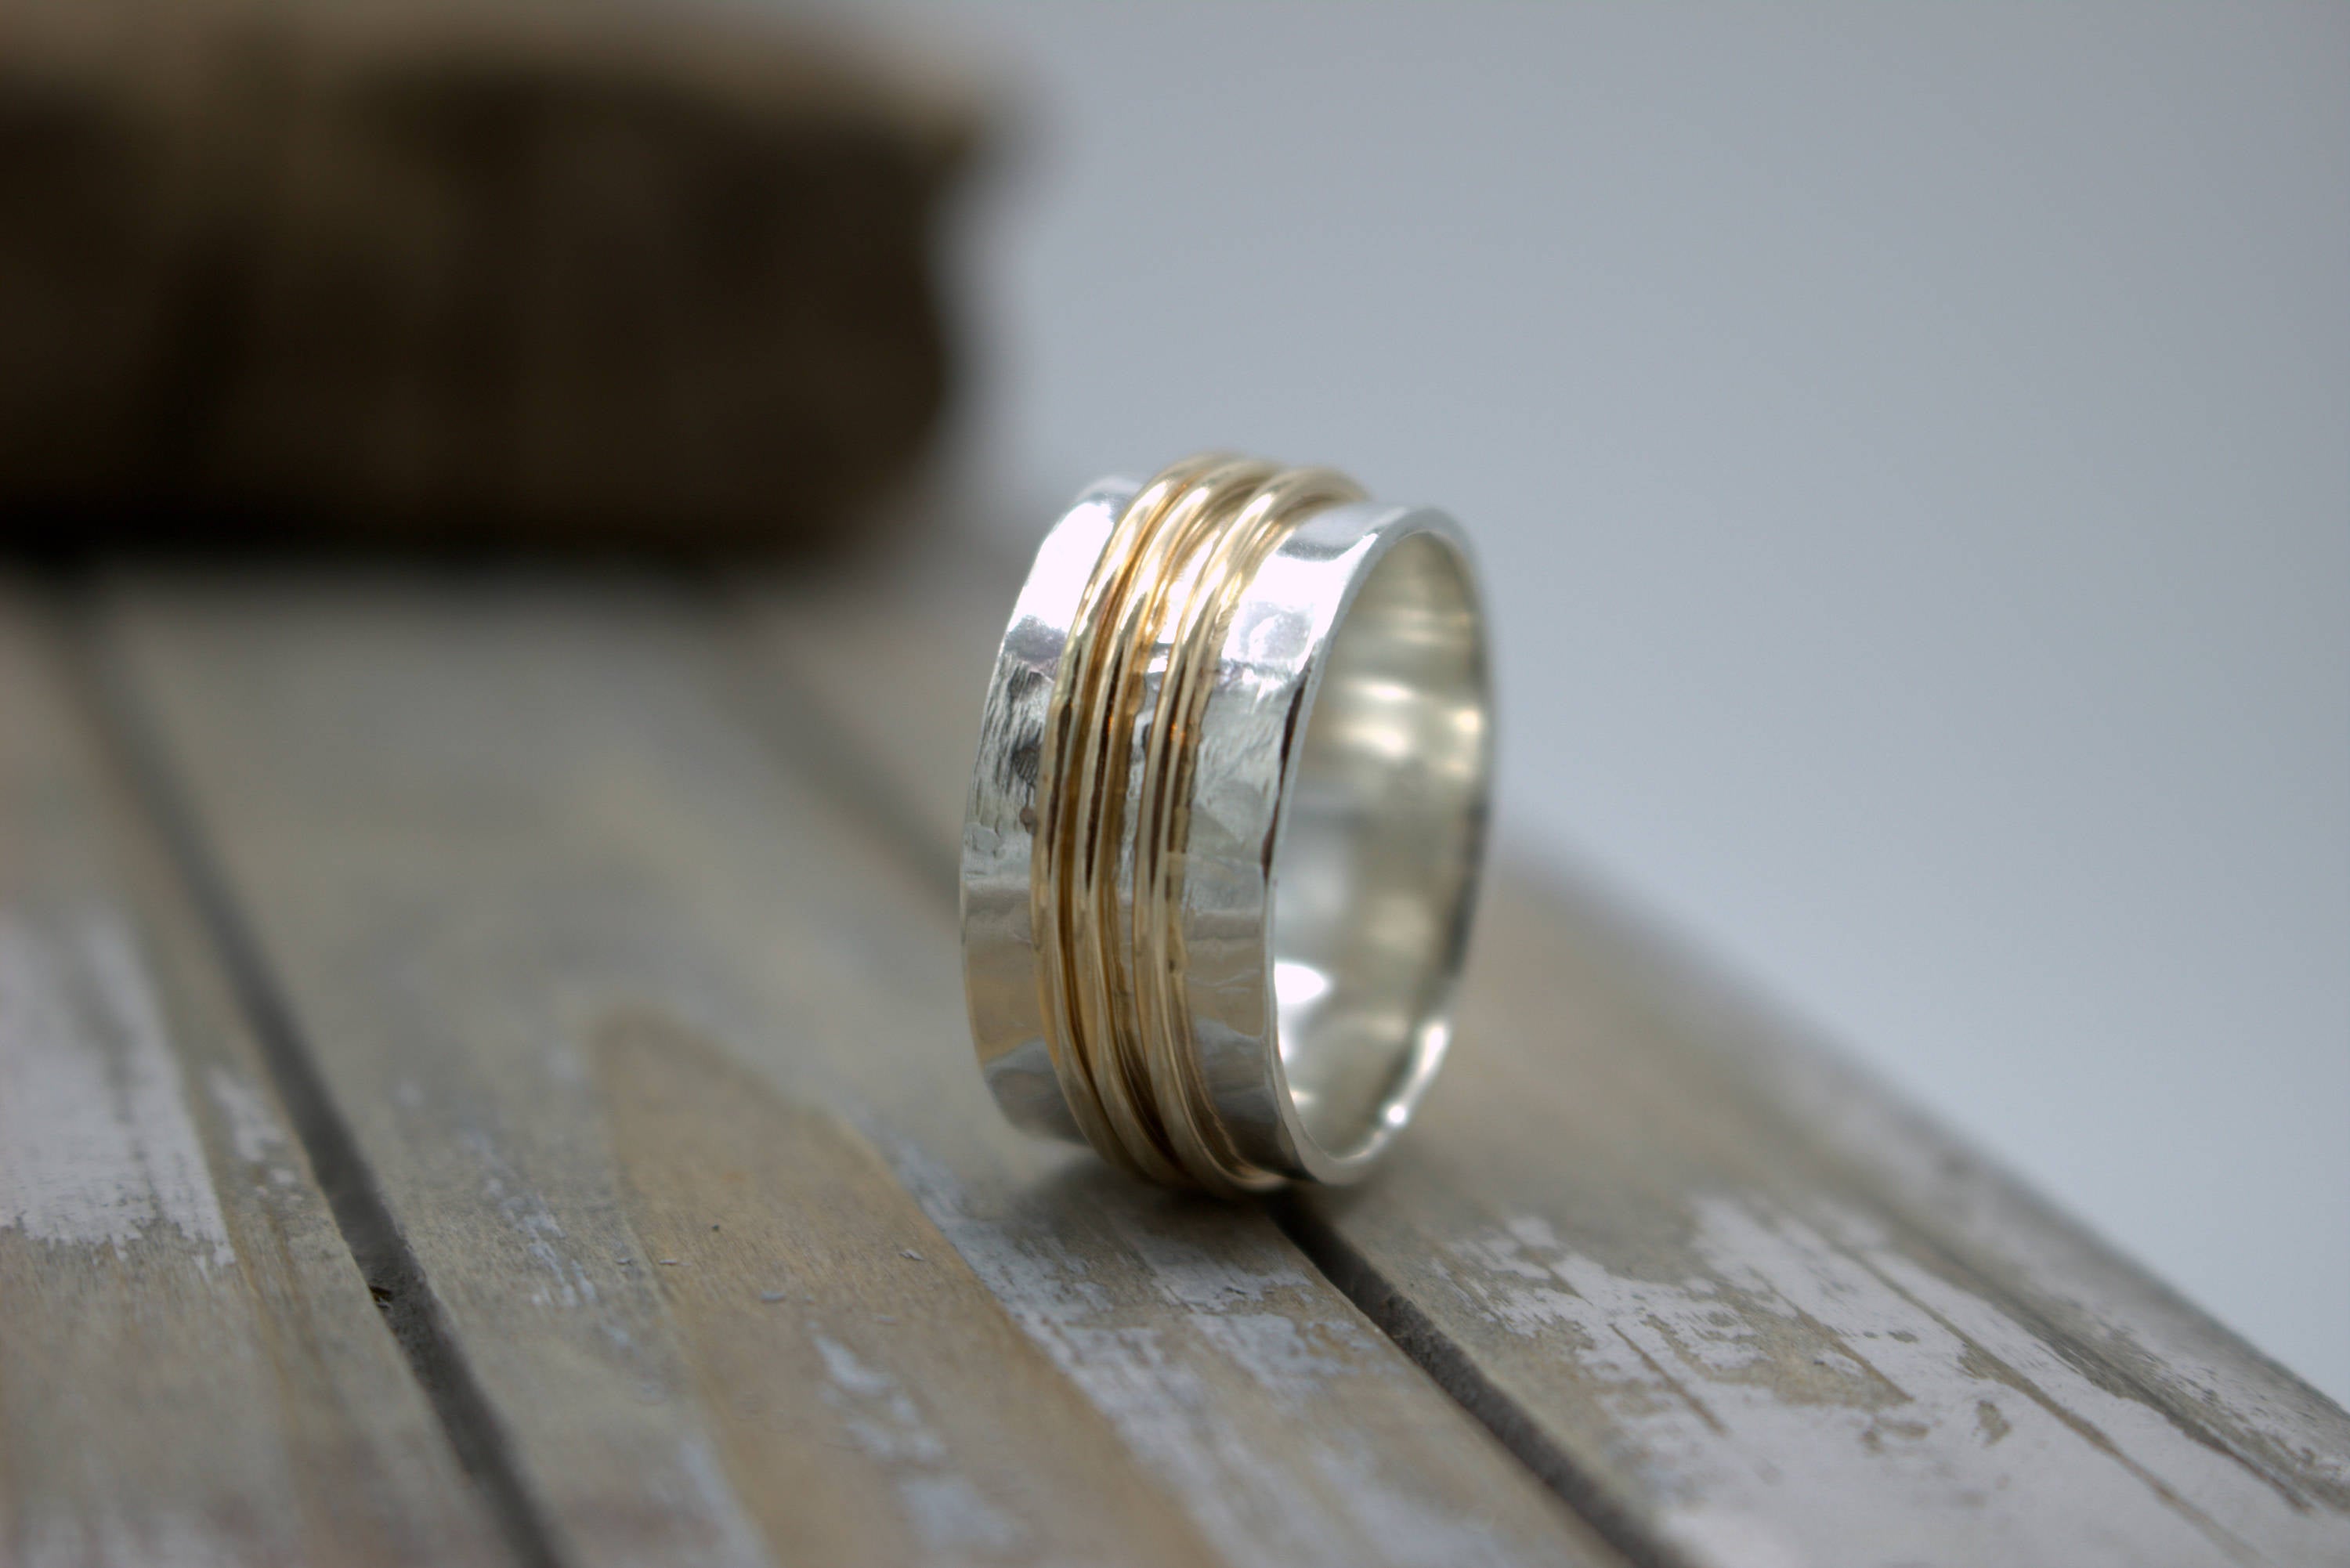 Spinner Ring - Gold Silver Meditation Ring - Gift for her - Jewelry sale - wide band ring